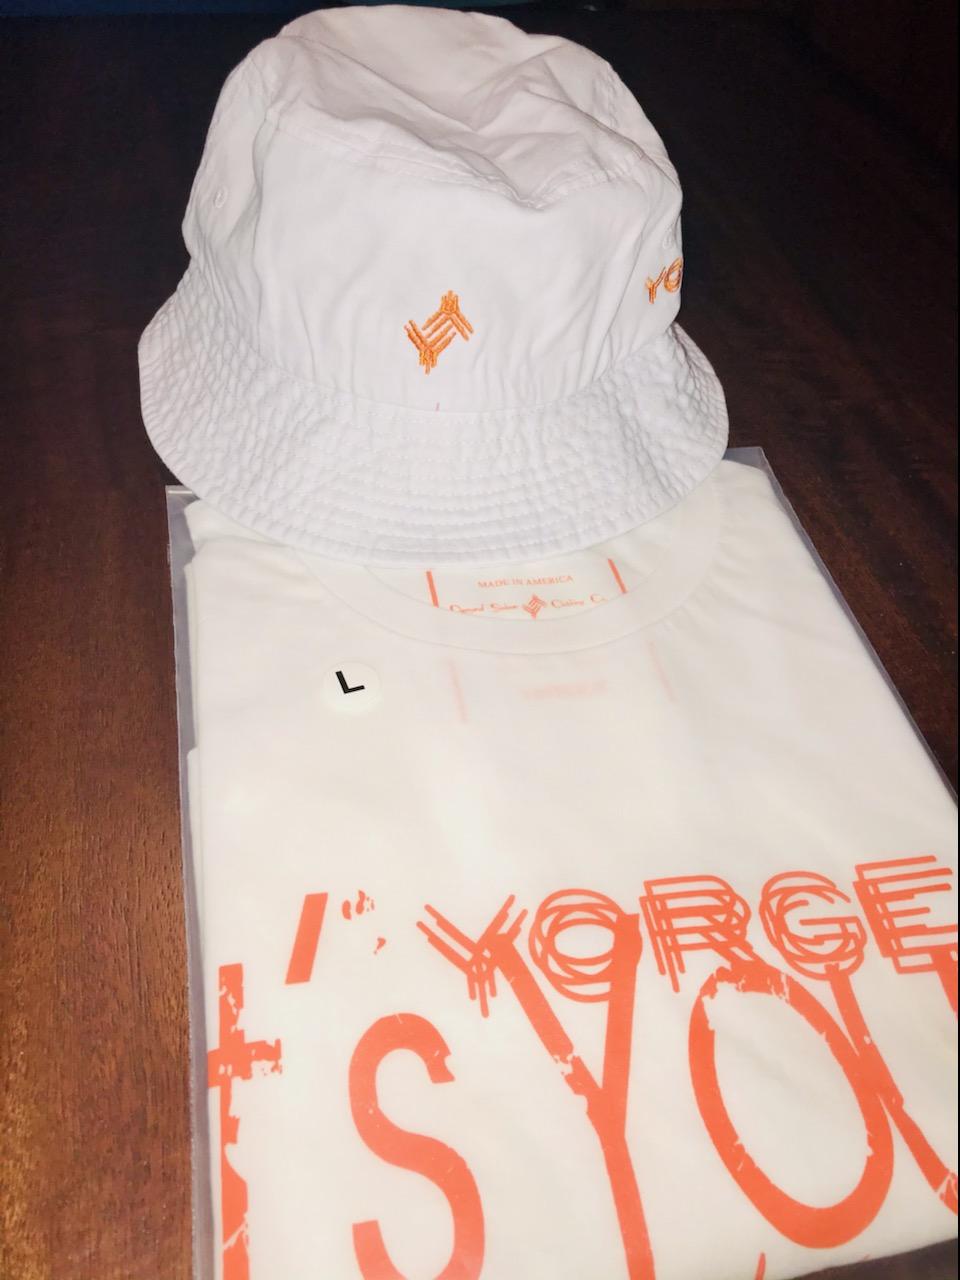 Yorgea By Demond Siobon's Org/Wht "Its Yours" Tee Set